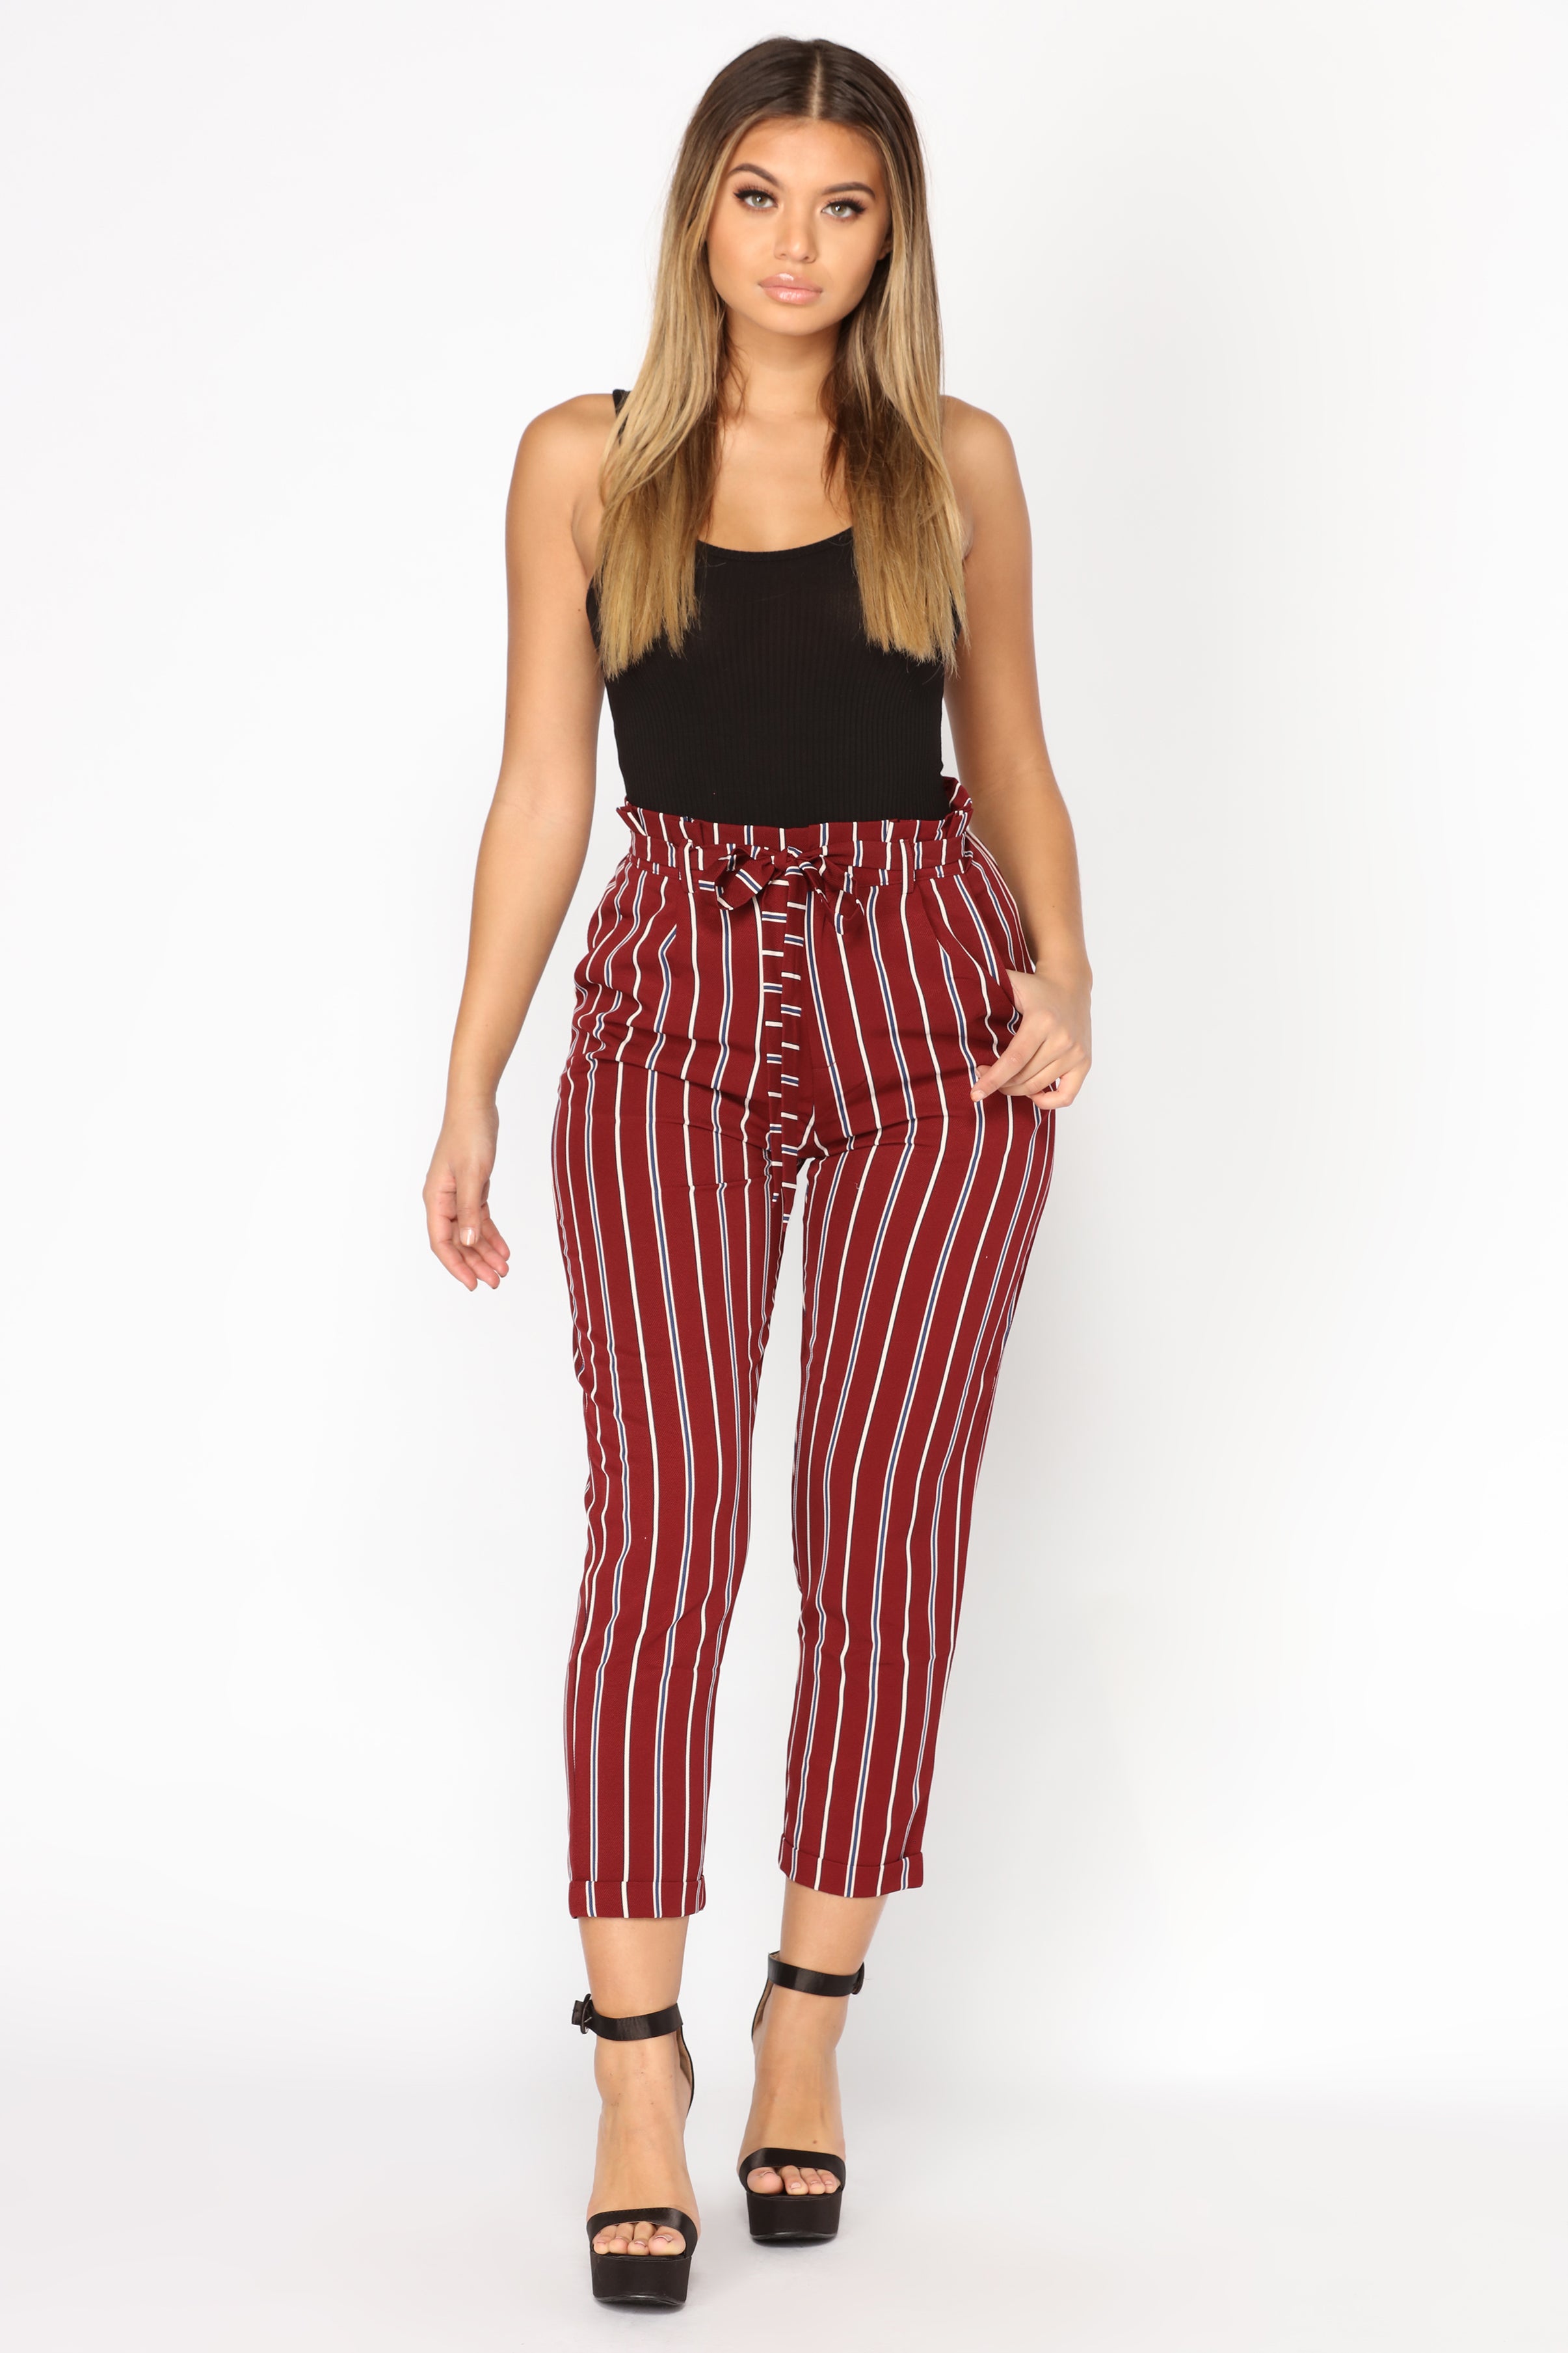 burgundy striped trousers